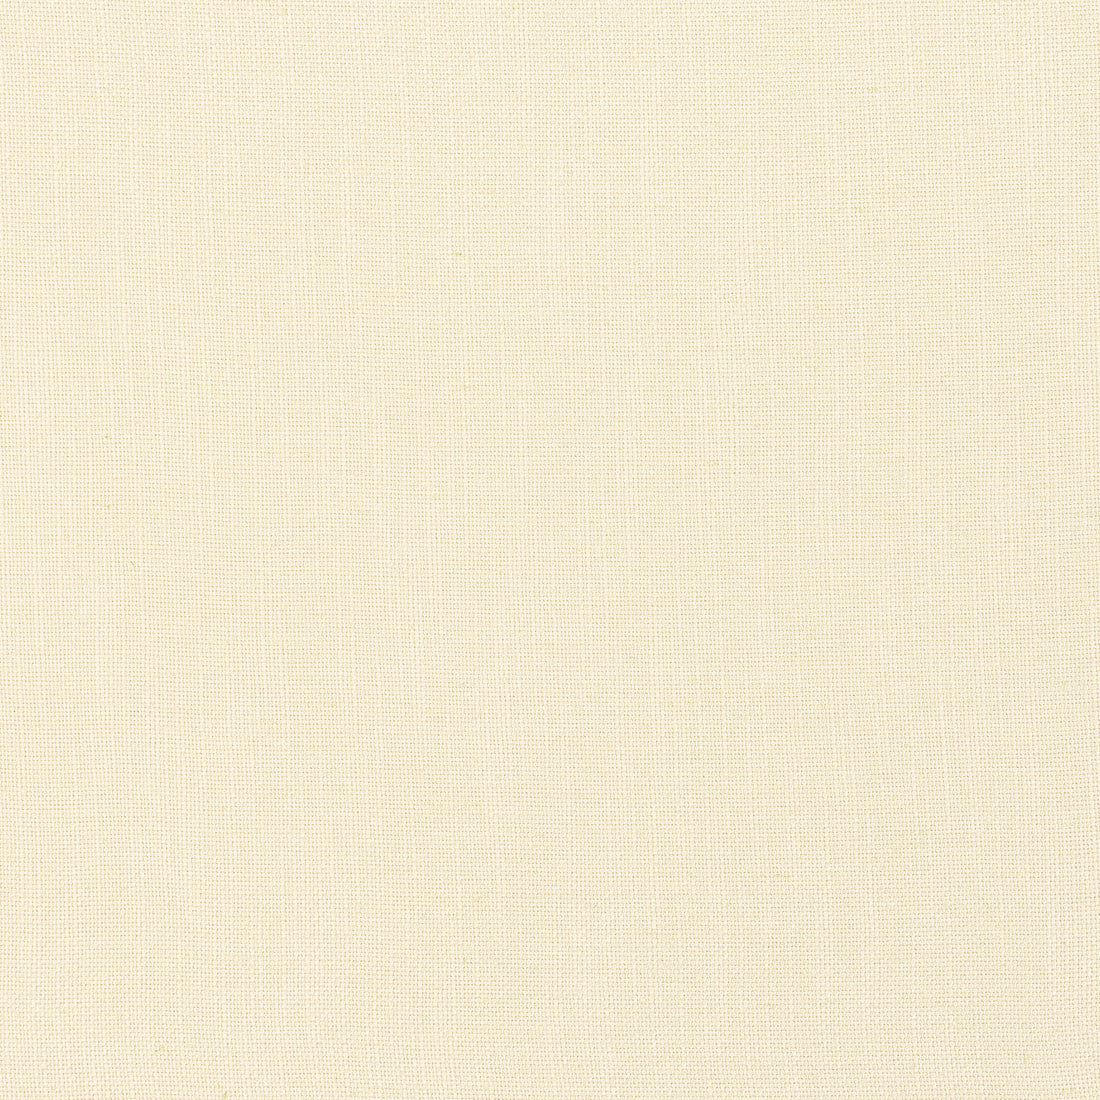 Palisade Linen fabric in vanilla color - pattern number FWW7630 - by Thibaut in the Palisades collection